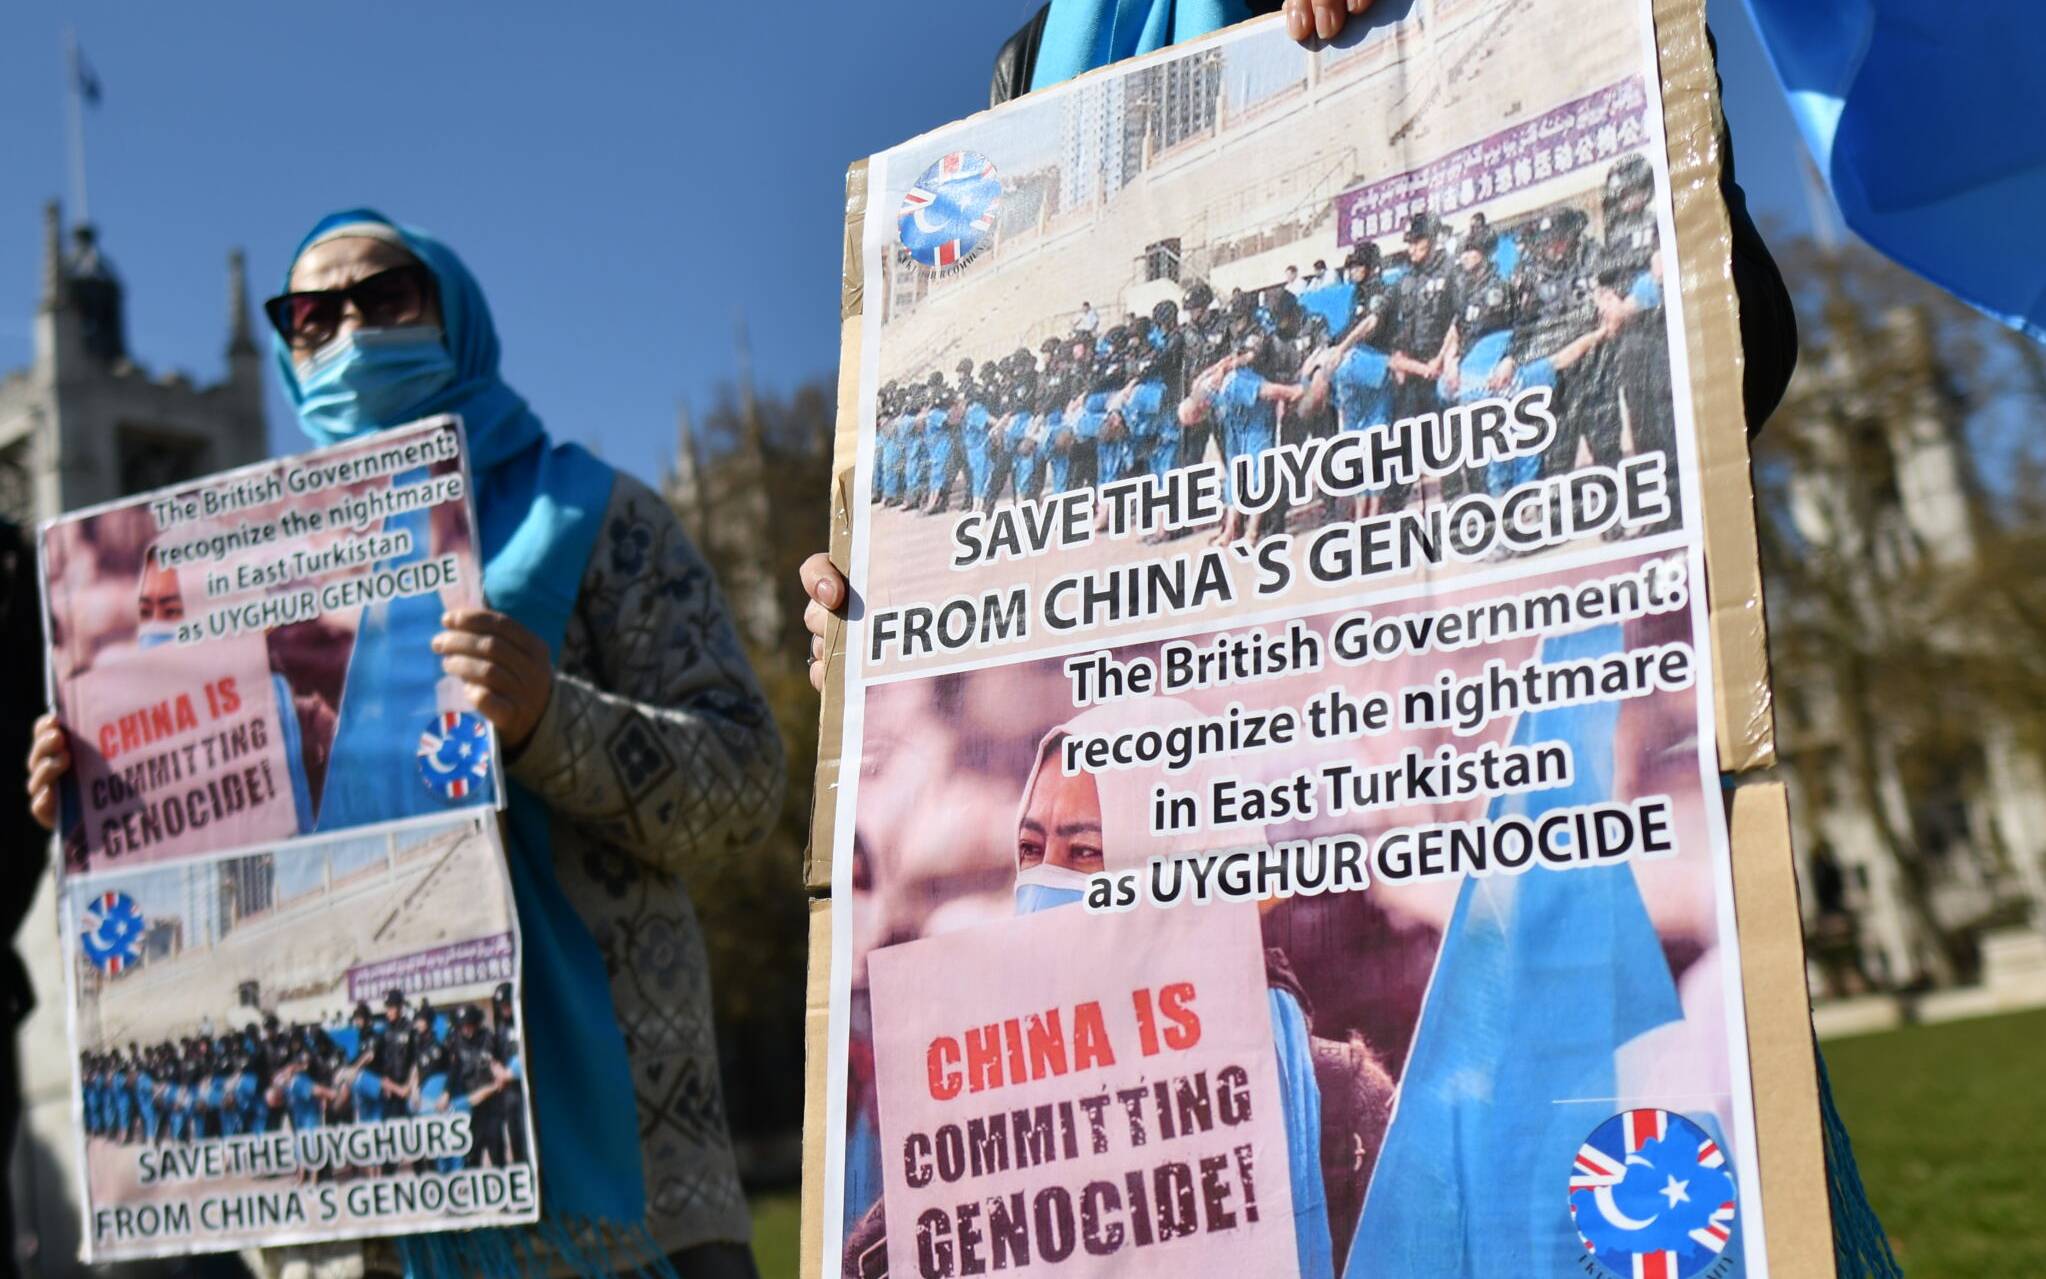 Members of the Uyghur community hold placards as they demonstrate to call on the British parliament to vote to recognise alleged persecution of China's Muslim minority Uyghur people as genocide and crimes against humanity in London on April 22, 2021. - Lawmakers in the British Parliament will on April 22 debate a motion on alleged human rights abuses and persecution of China's Muslim Uyghur minority in the country's Xinjiang Autonomous Region. Last month Britain accused China of "gross human rights violations" against the  Uyghur minority after Beijing slapped sanctions on UK lawmakers and lobby groups, widening a rift with Western powers over alleged abuses in Xinjiang. (Photo by JUSTIN TALLIS / AFP)